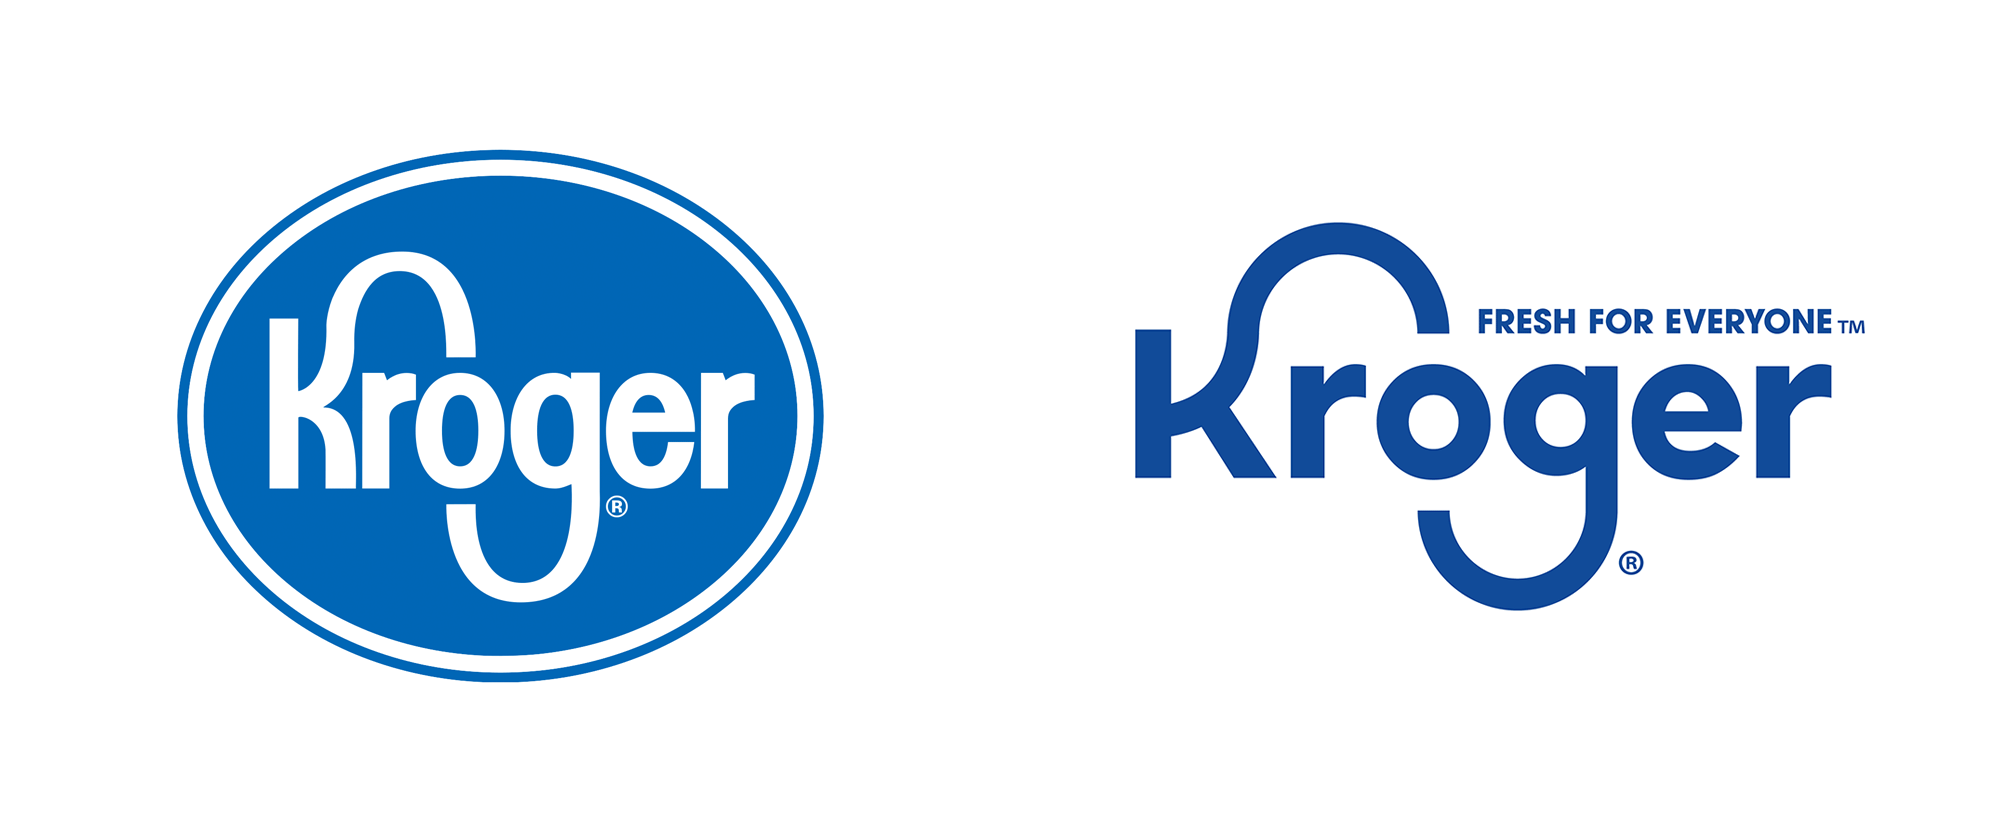 Reviewed New Logo and Identity for Kroger by DDB Search by Muzli